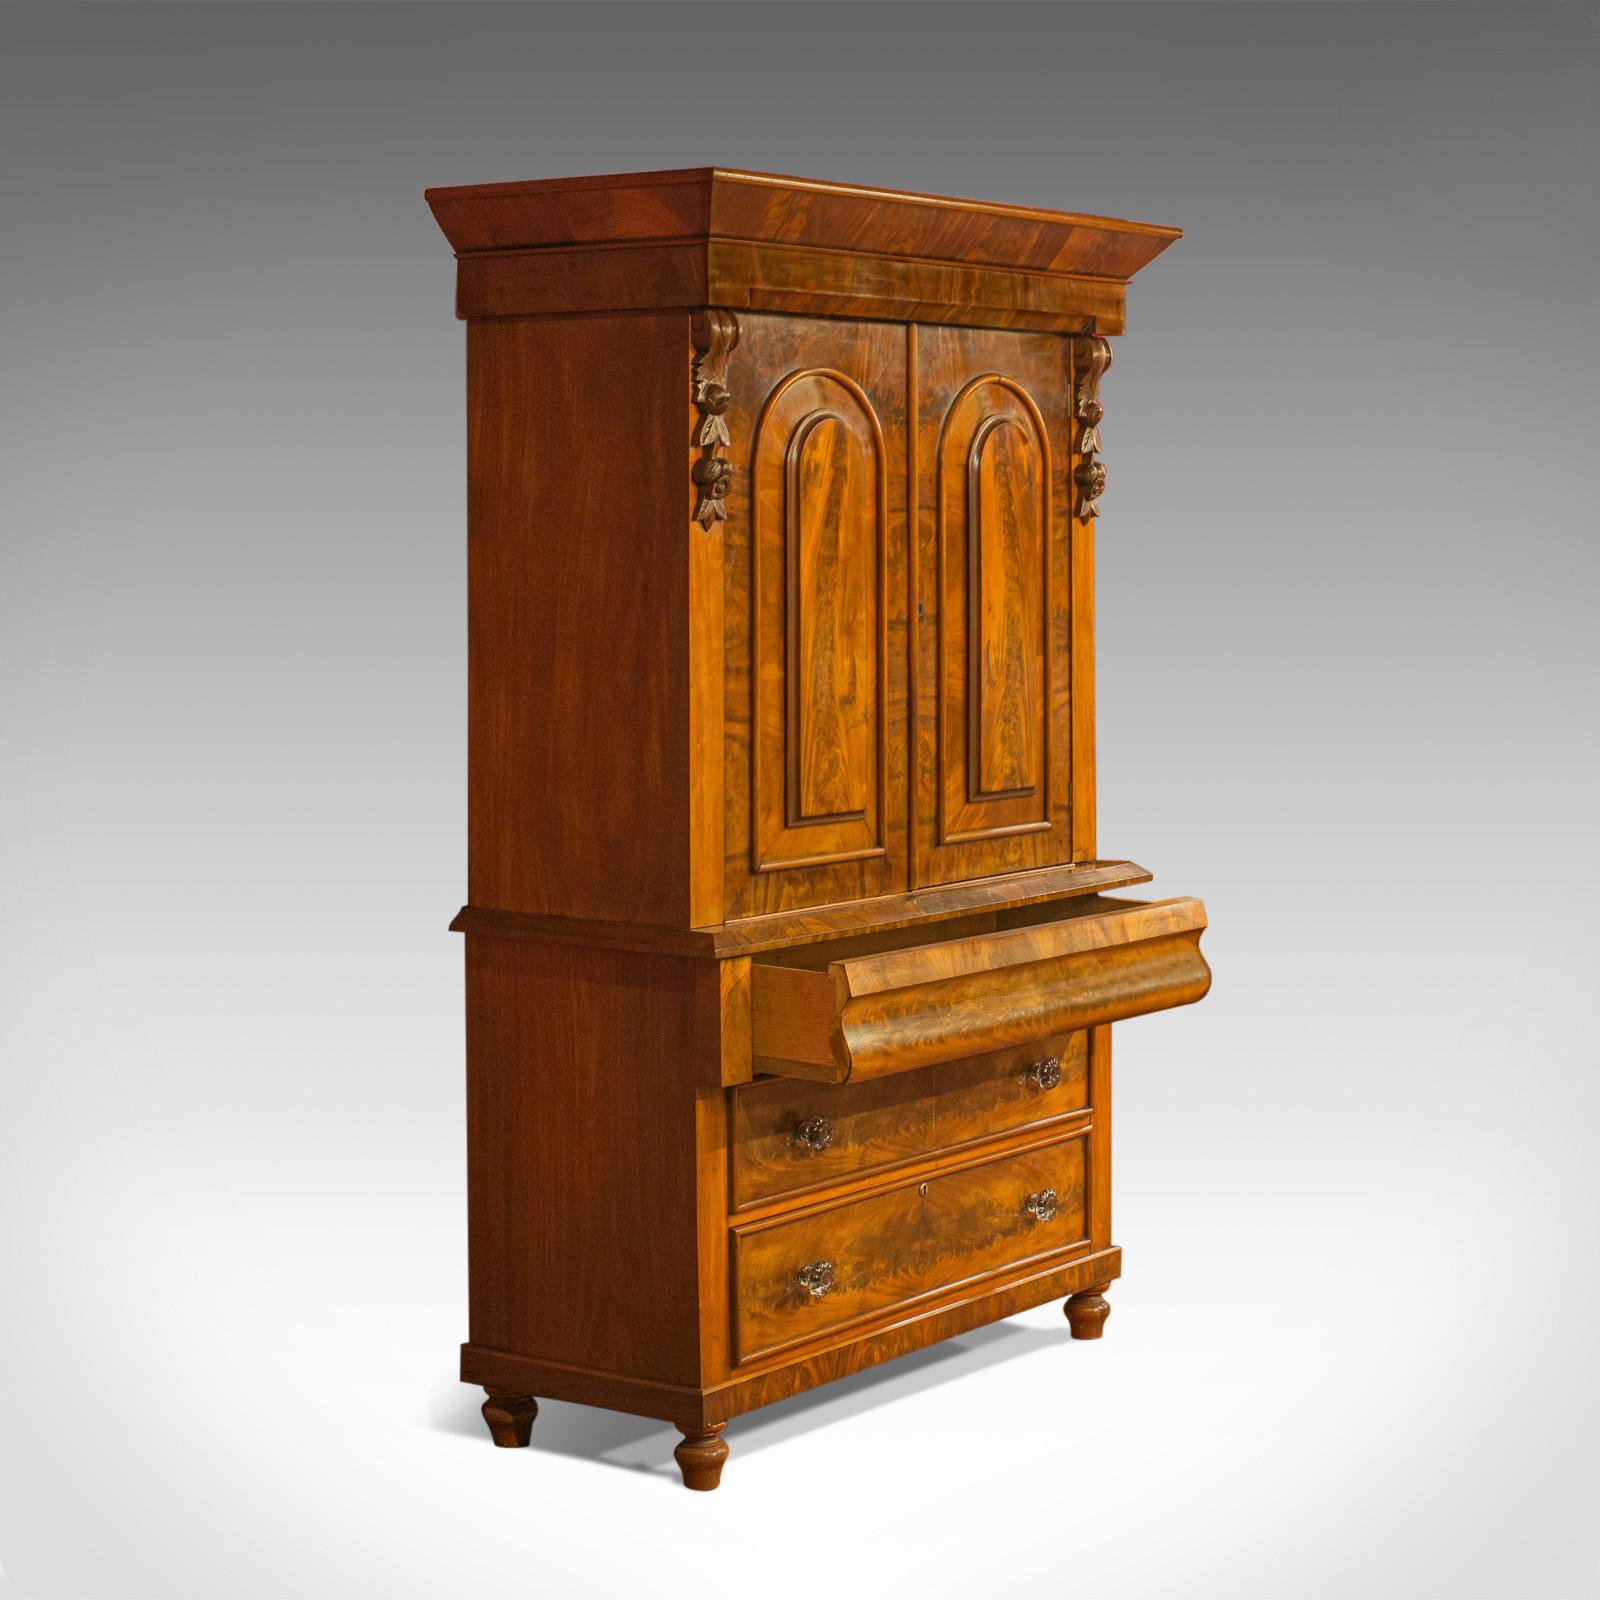 This is an antique linen press, an early Victorian, housekeeper's cupboard in flame mahogany dating to mid-19th century, circa 1860.

A fine example in select flame mahogany
Displaying grain interest in mellow, russet hues 
Desirable aged patina